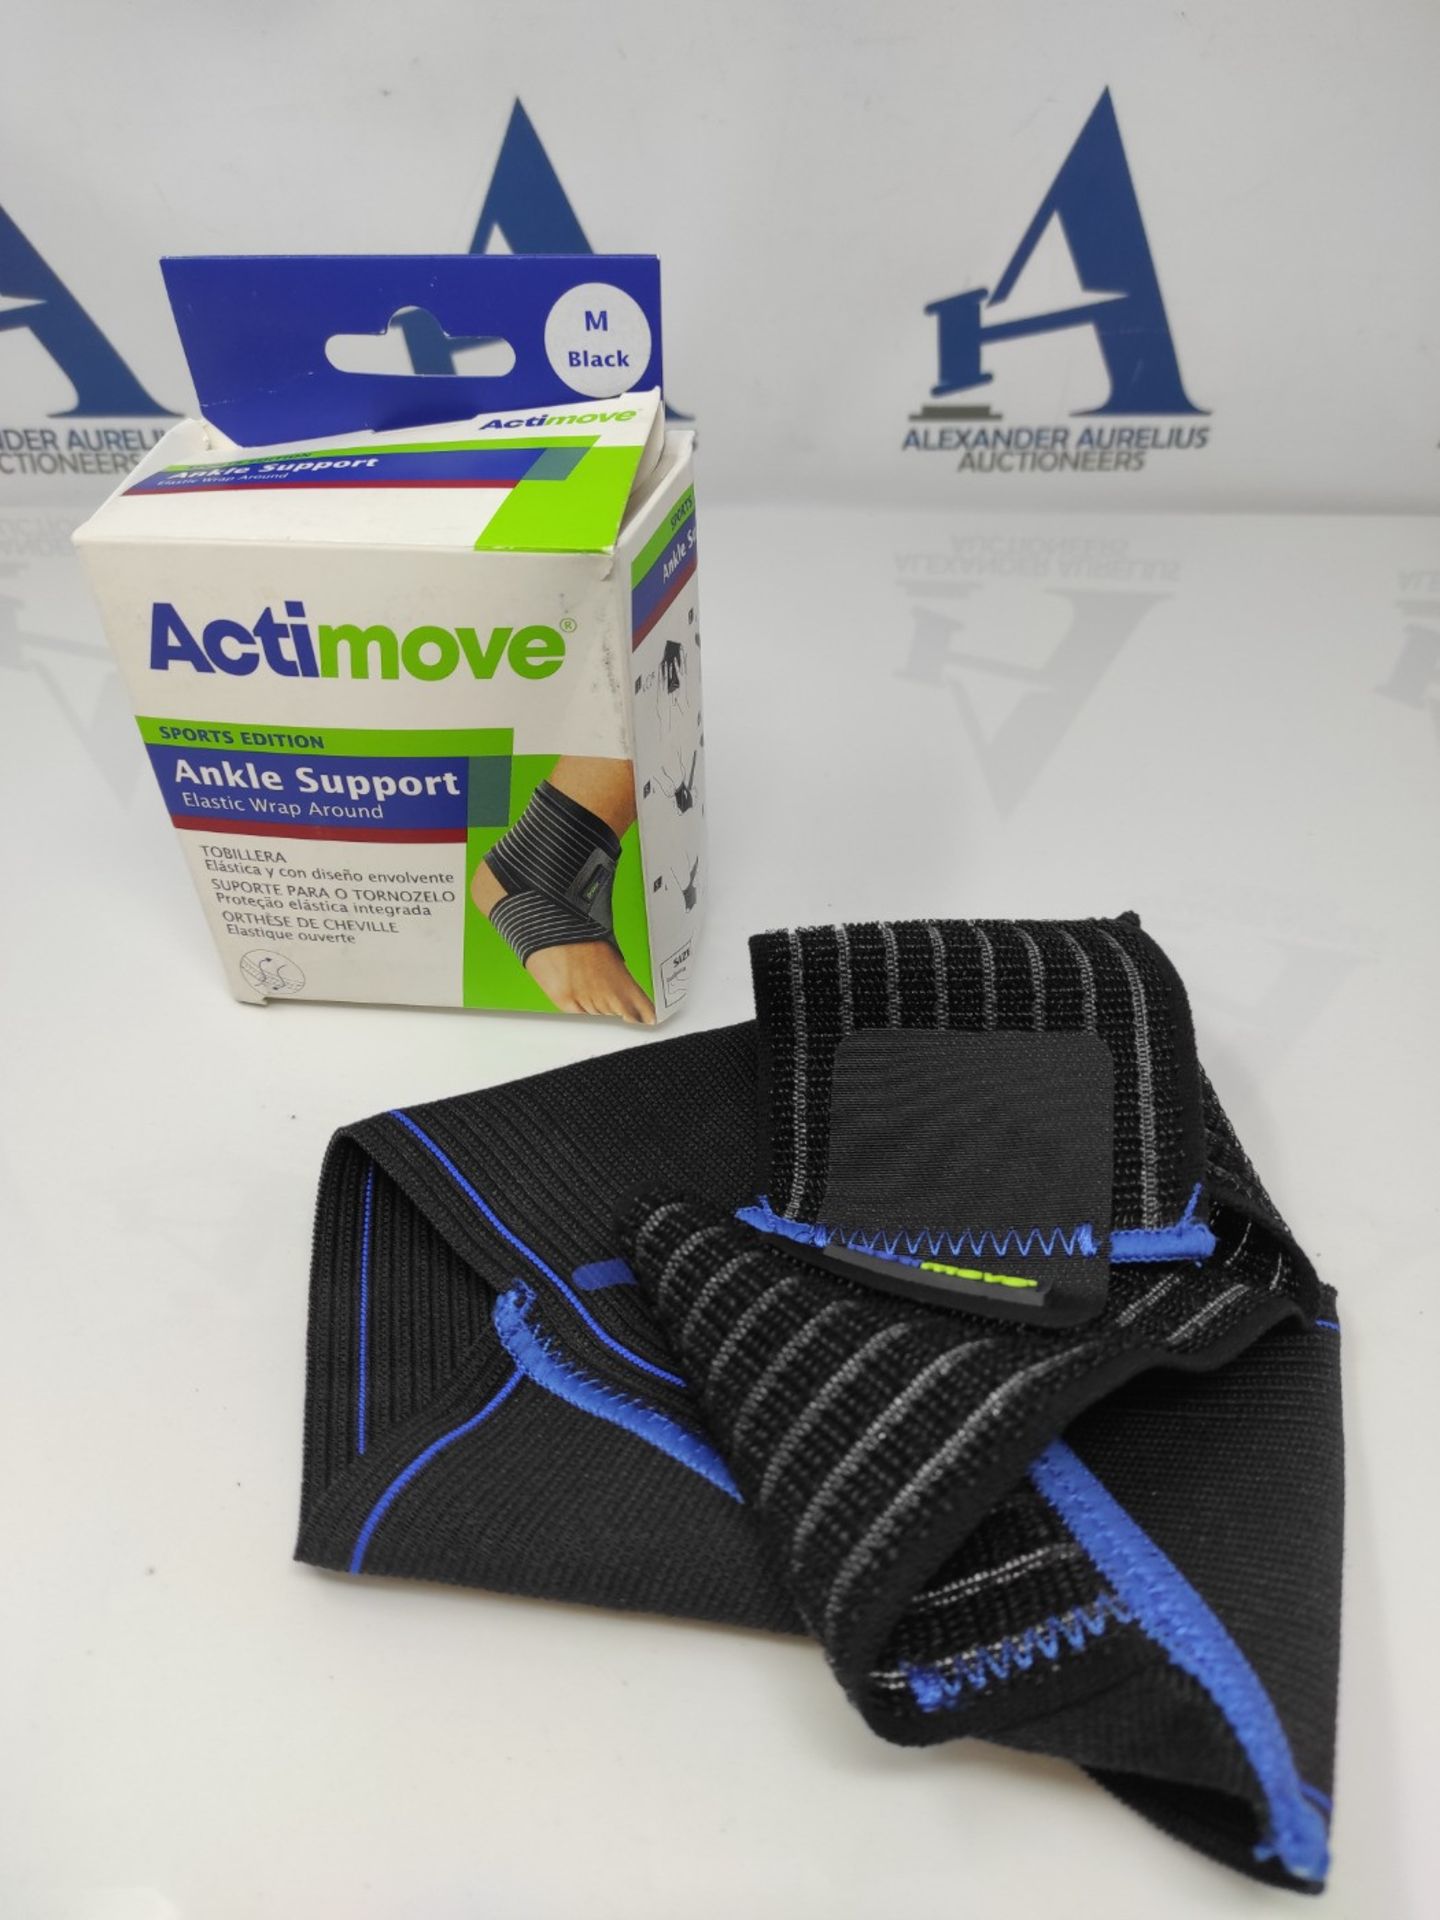 Actimove - Sports Edition - Elastic Wrap-around Ankle Support - For Pain Relief & Supp - Bild 2 aus 2